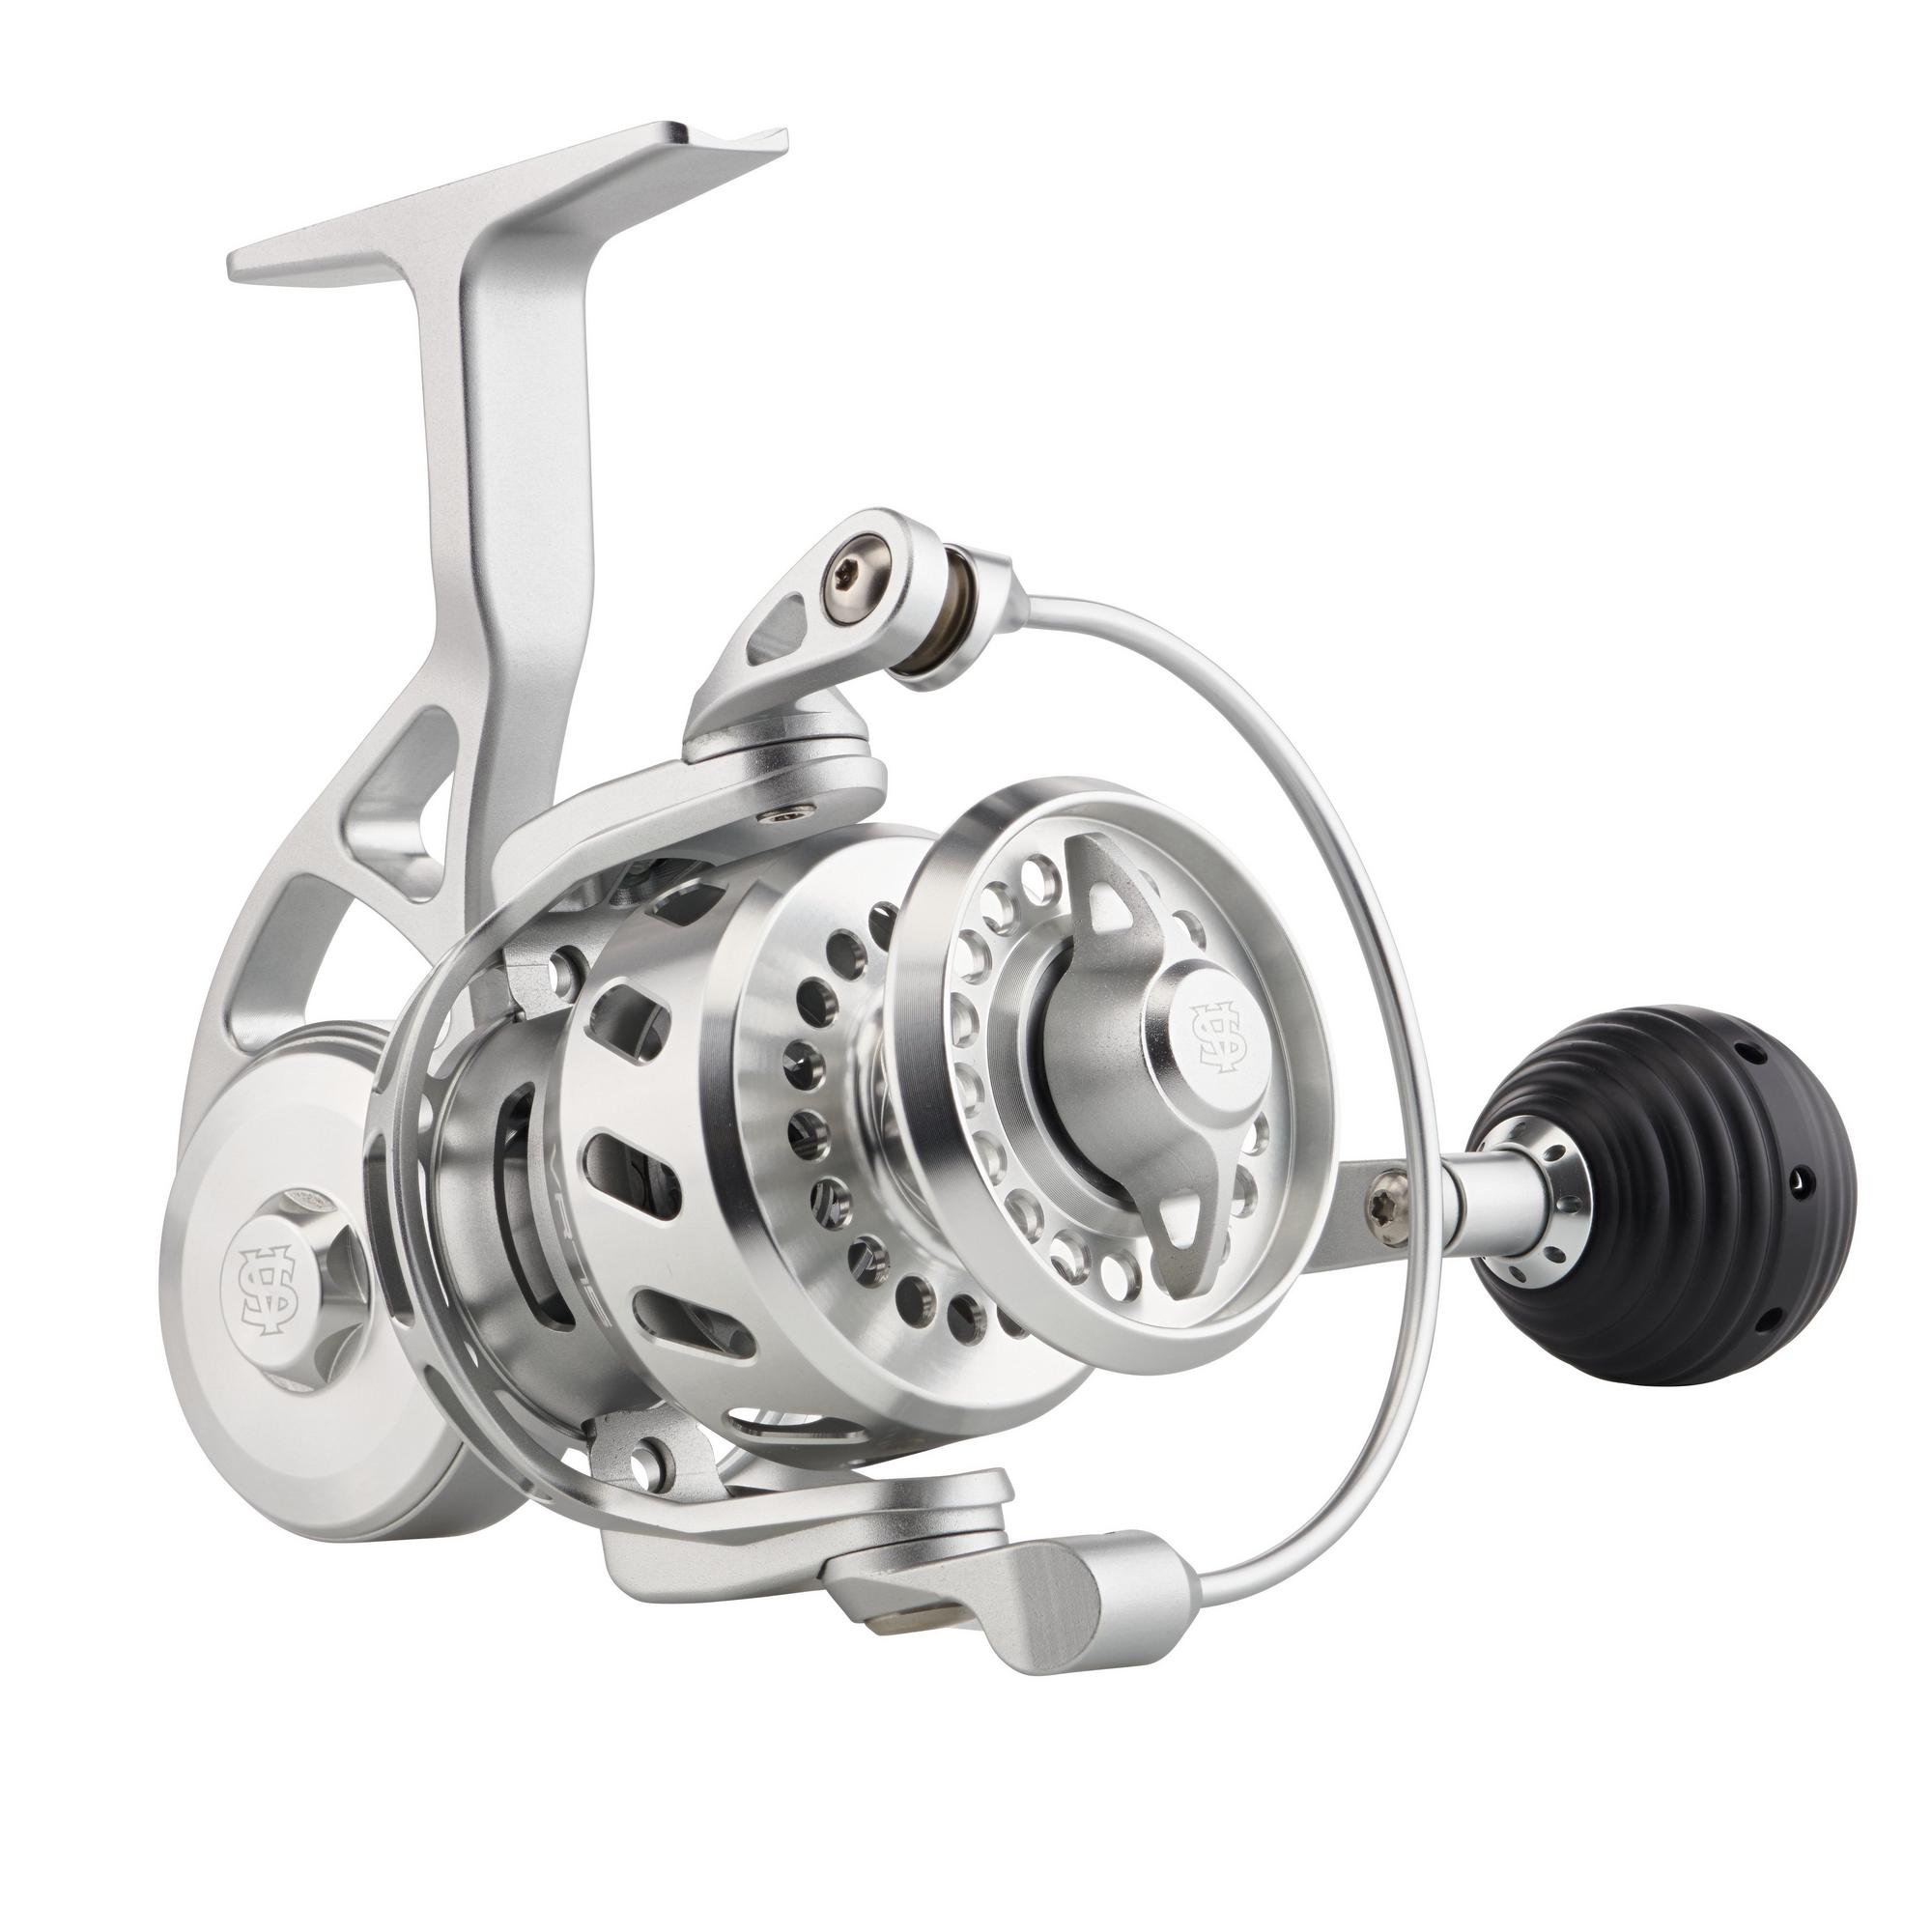 Van Staal VR75 Bailed Series Spinning Reel (Black or Silver) w/FREE BR – J  & J Sports Inc.-Bait & Tackle-Fishing Long Island